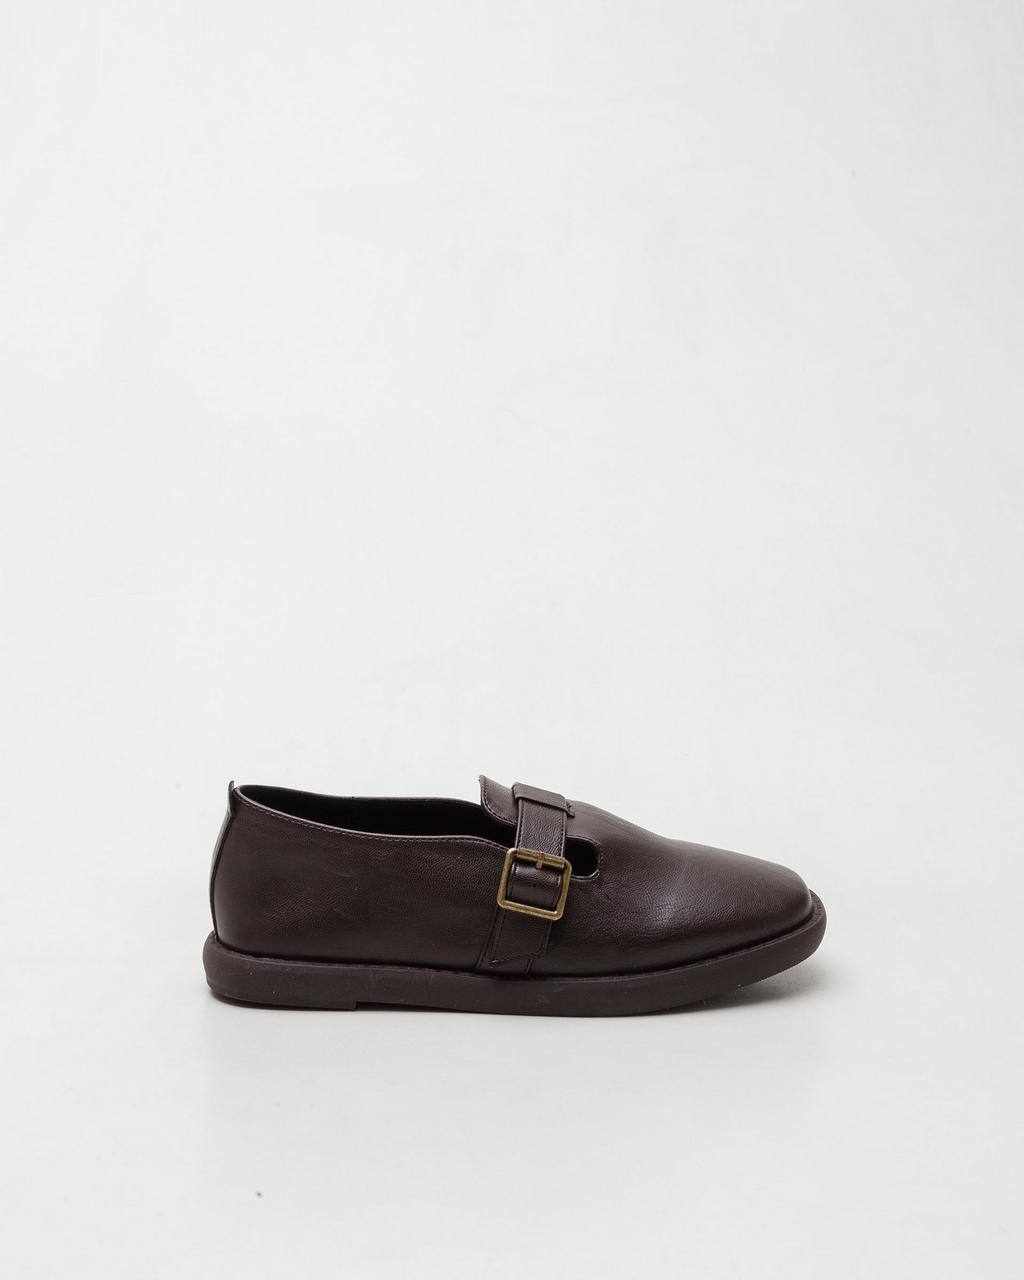 Tagtraume Cresent-03 - Brown(브라운)